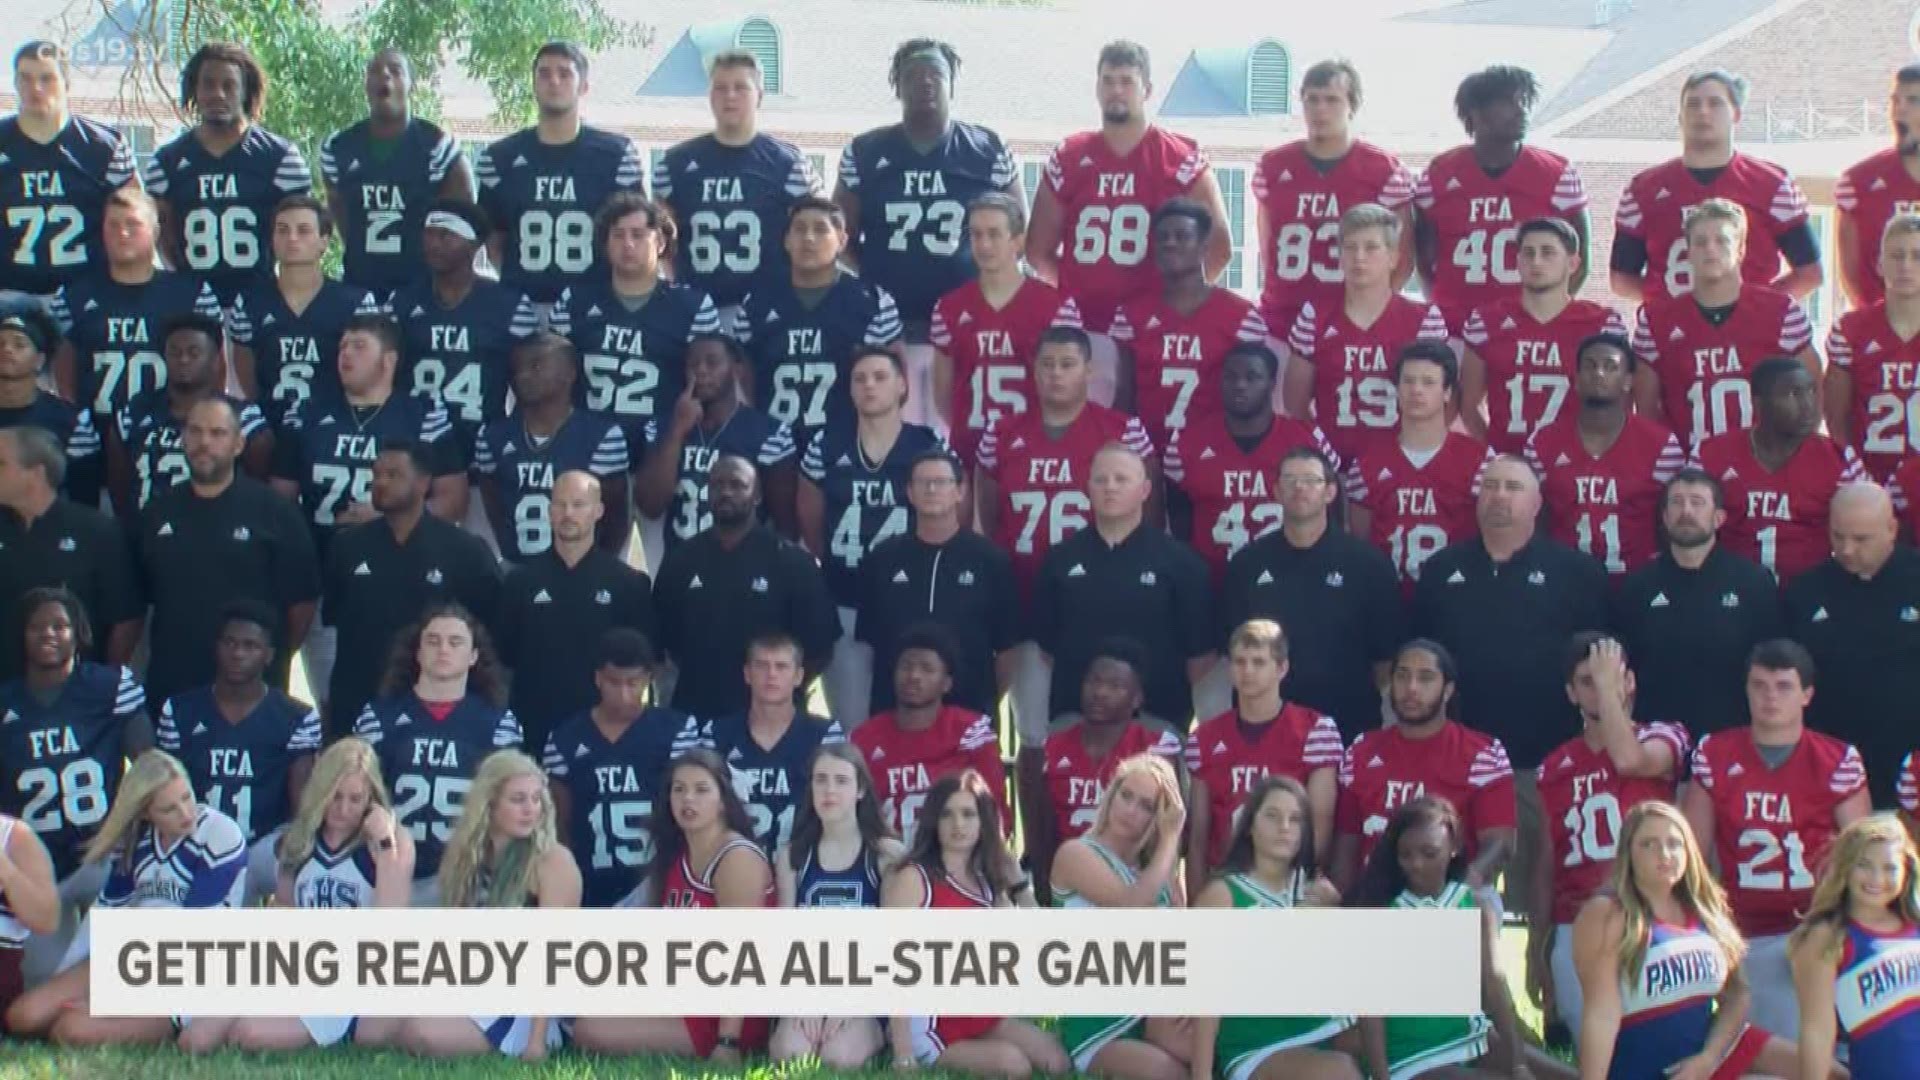 Preps underway for FCA All-Star Games